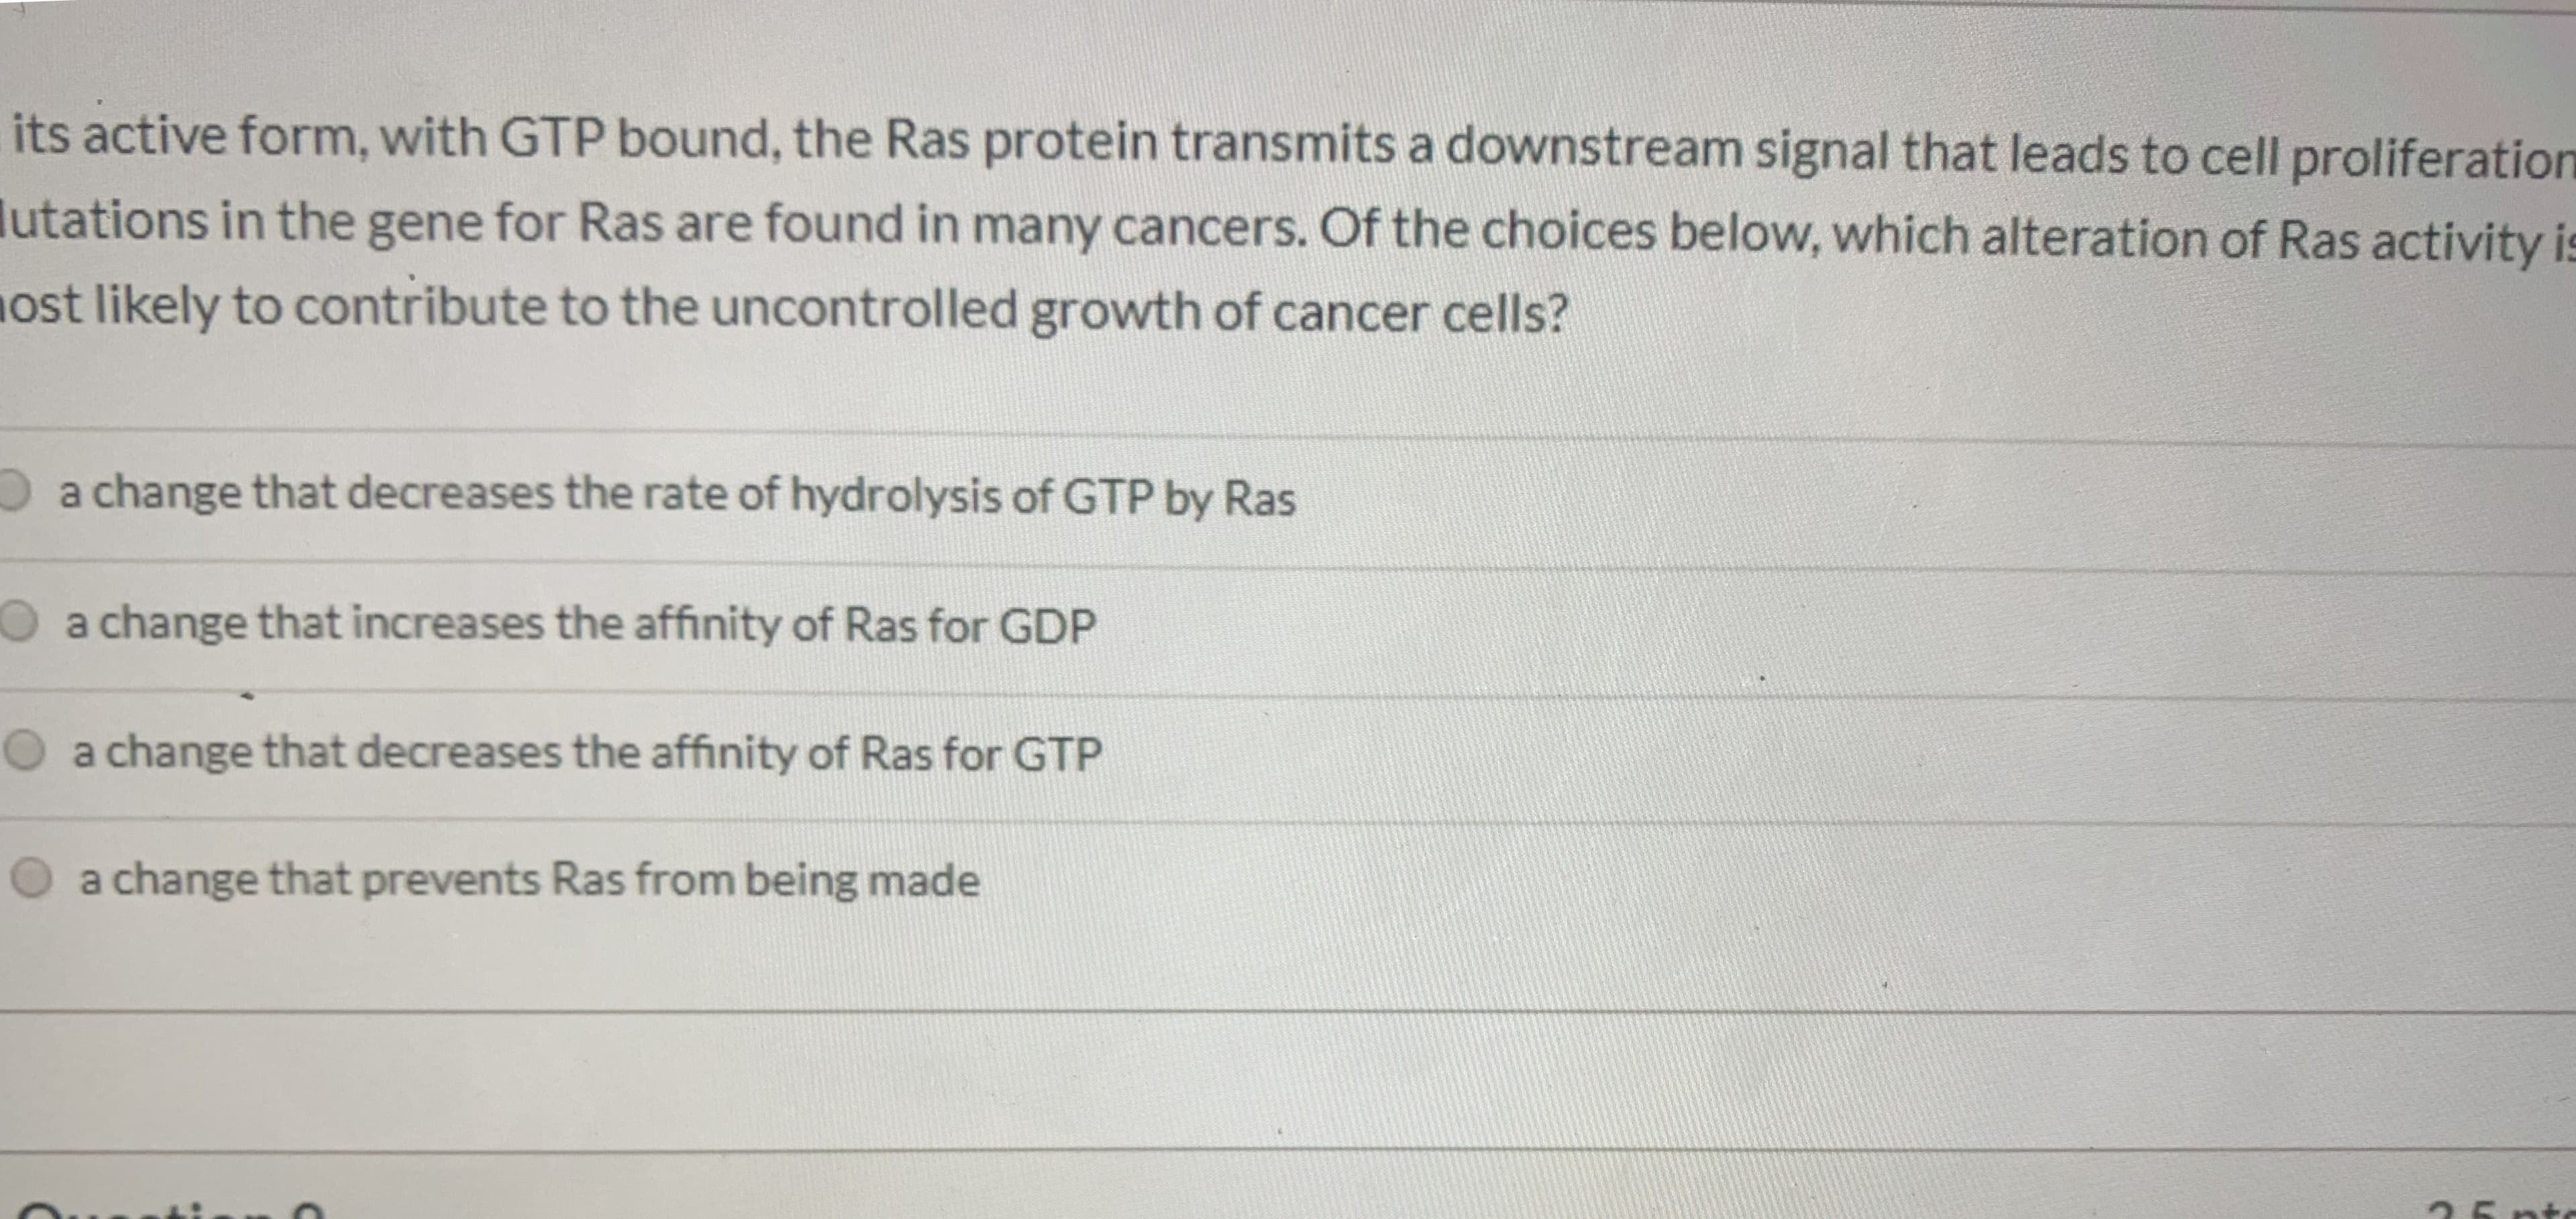 a change that decreases the rate of hydrolysis of GTP by Ras
a change that increases the affinity of Ras for GDP
a change that decreases the affinity of Ras for GTP
O a change that prevents Ras from being made
